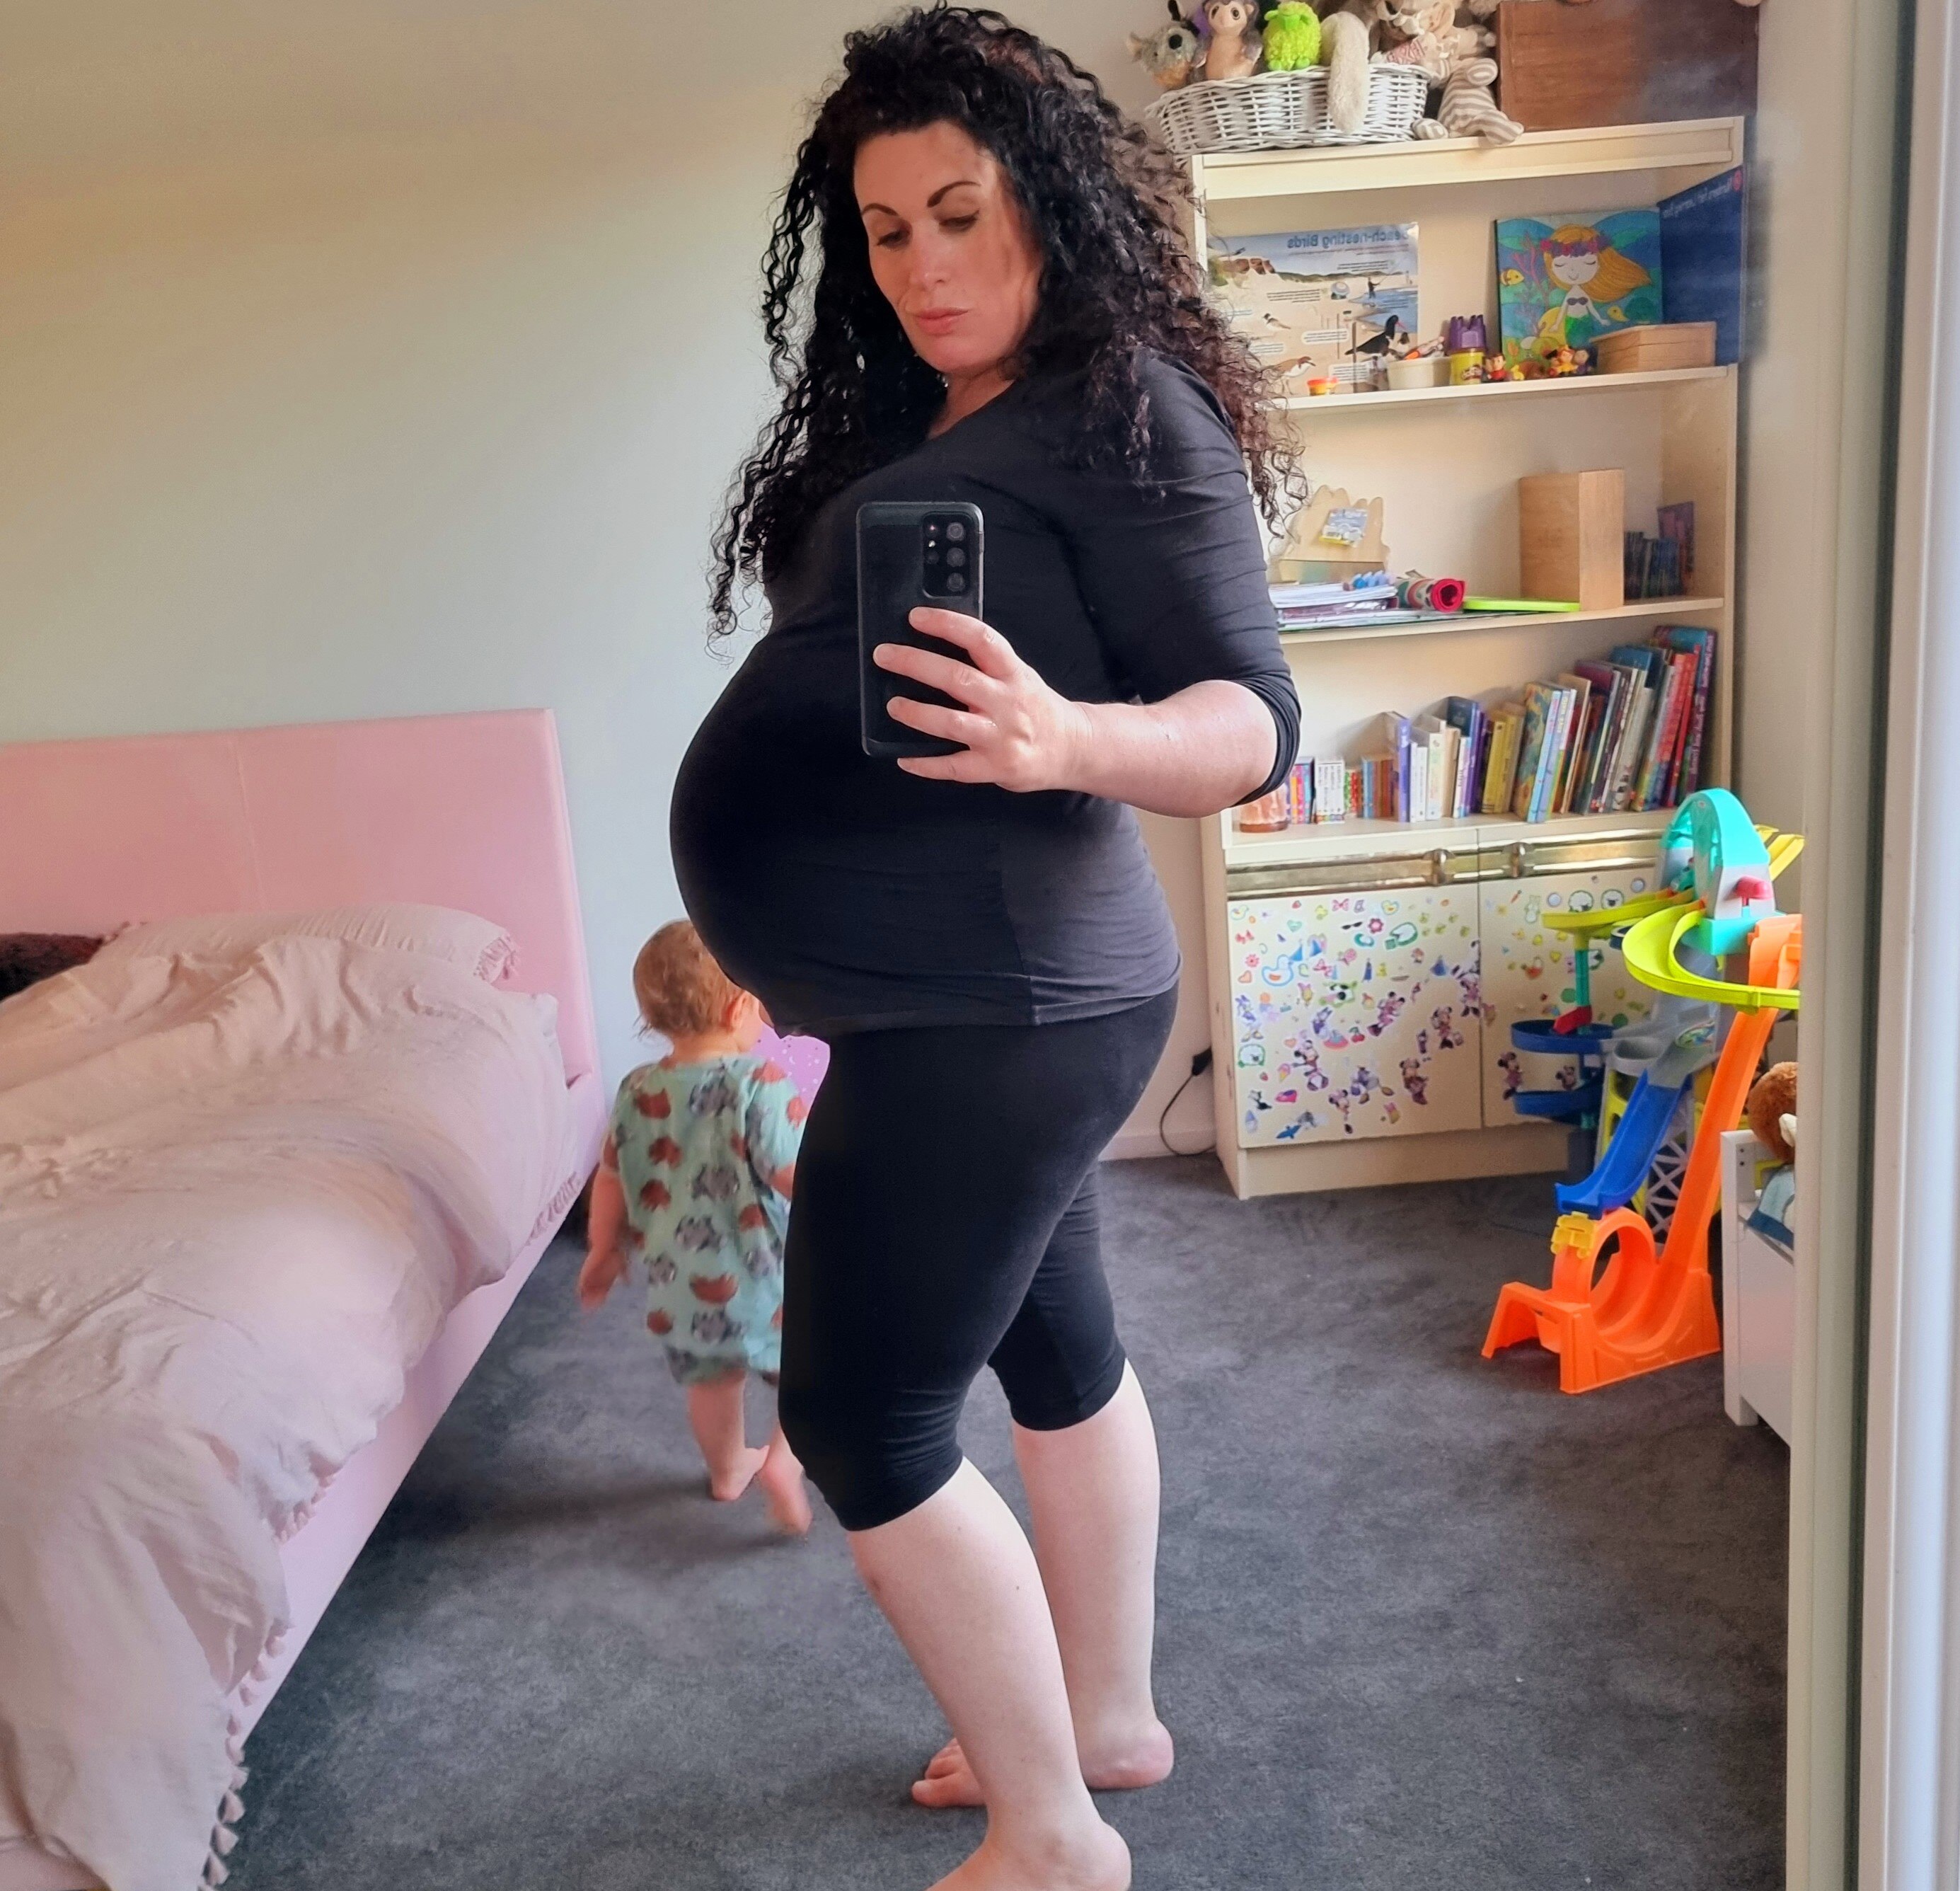 A heavily pregnant woman takes a selfie showing her belly